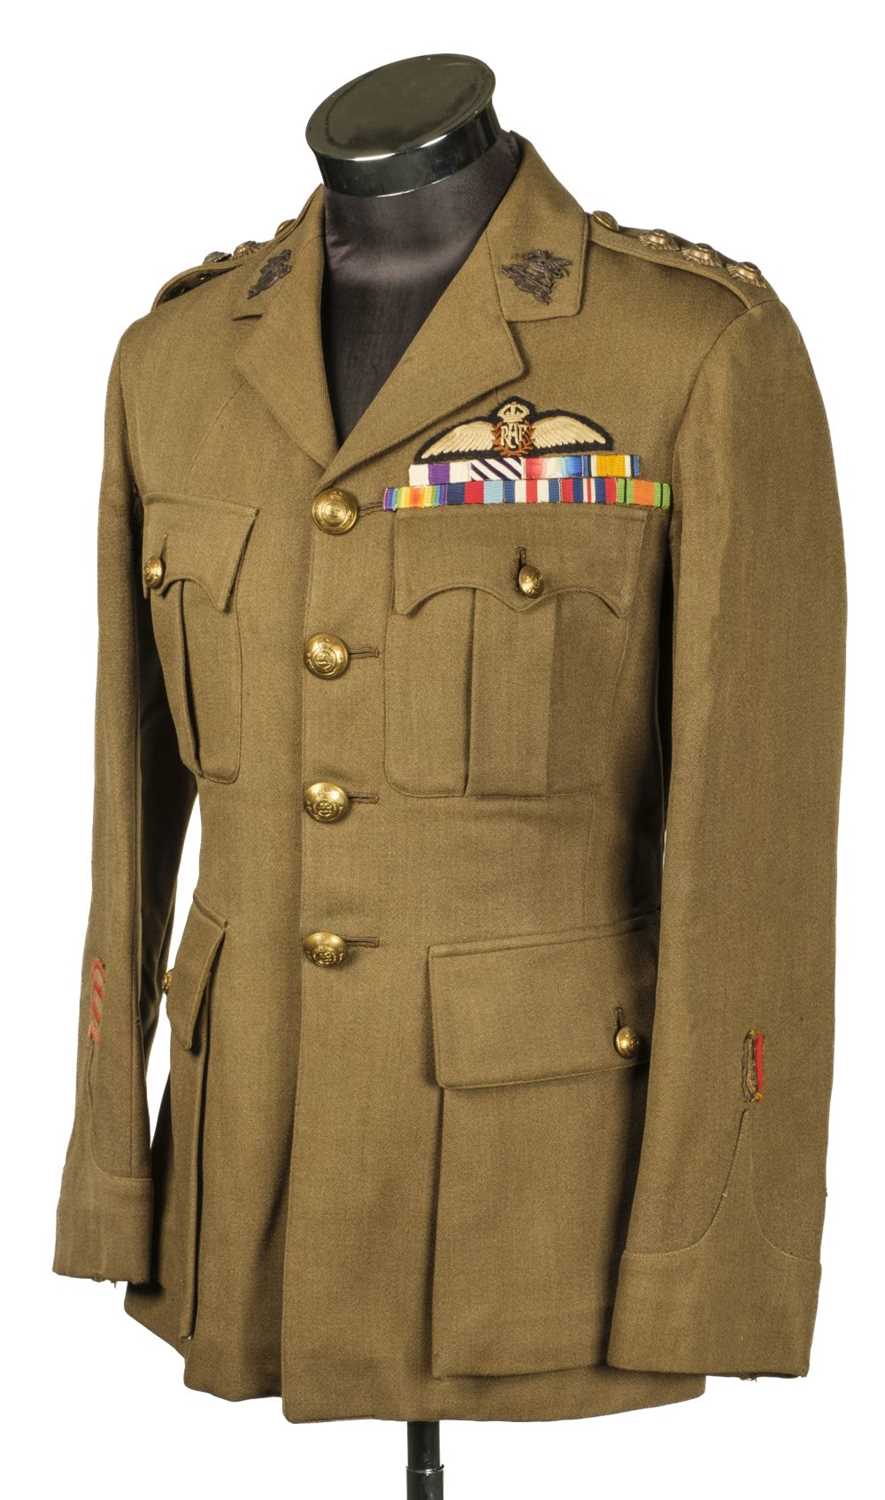 Lot 325 - Tunic. WWII tunic worn by an Officer of the Buffs (Royal Kent Regiment)